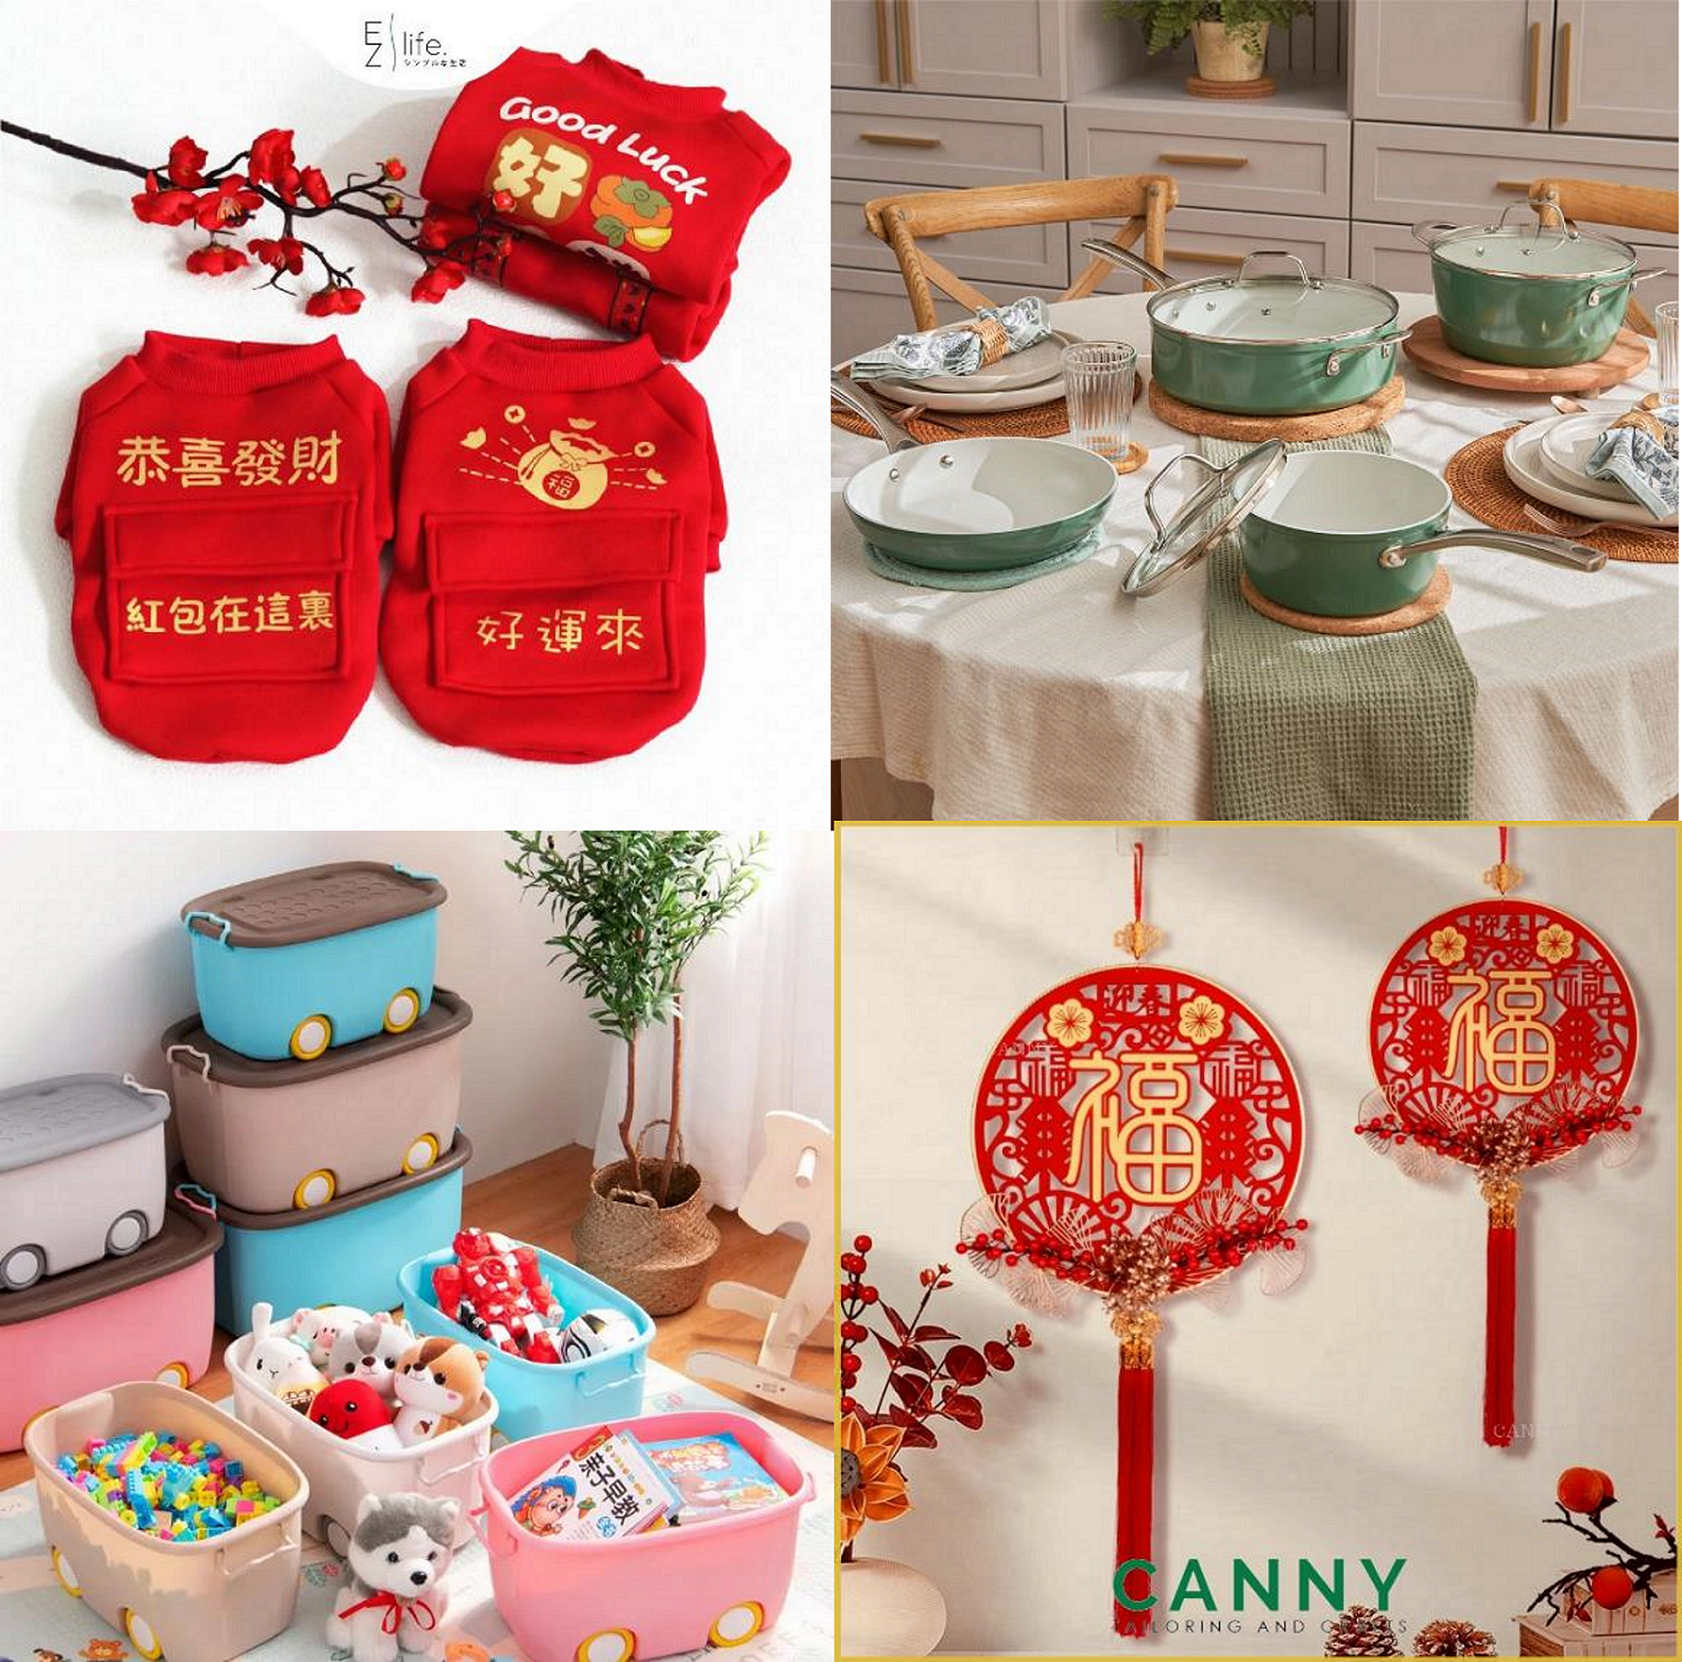 Four Budget-Friendly Finds on Shopee Live To Transform Your Home this Chinese New Year